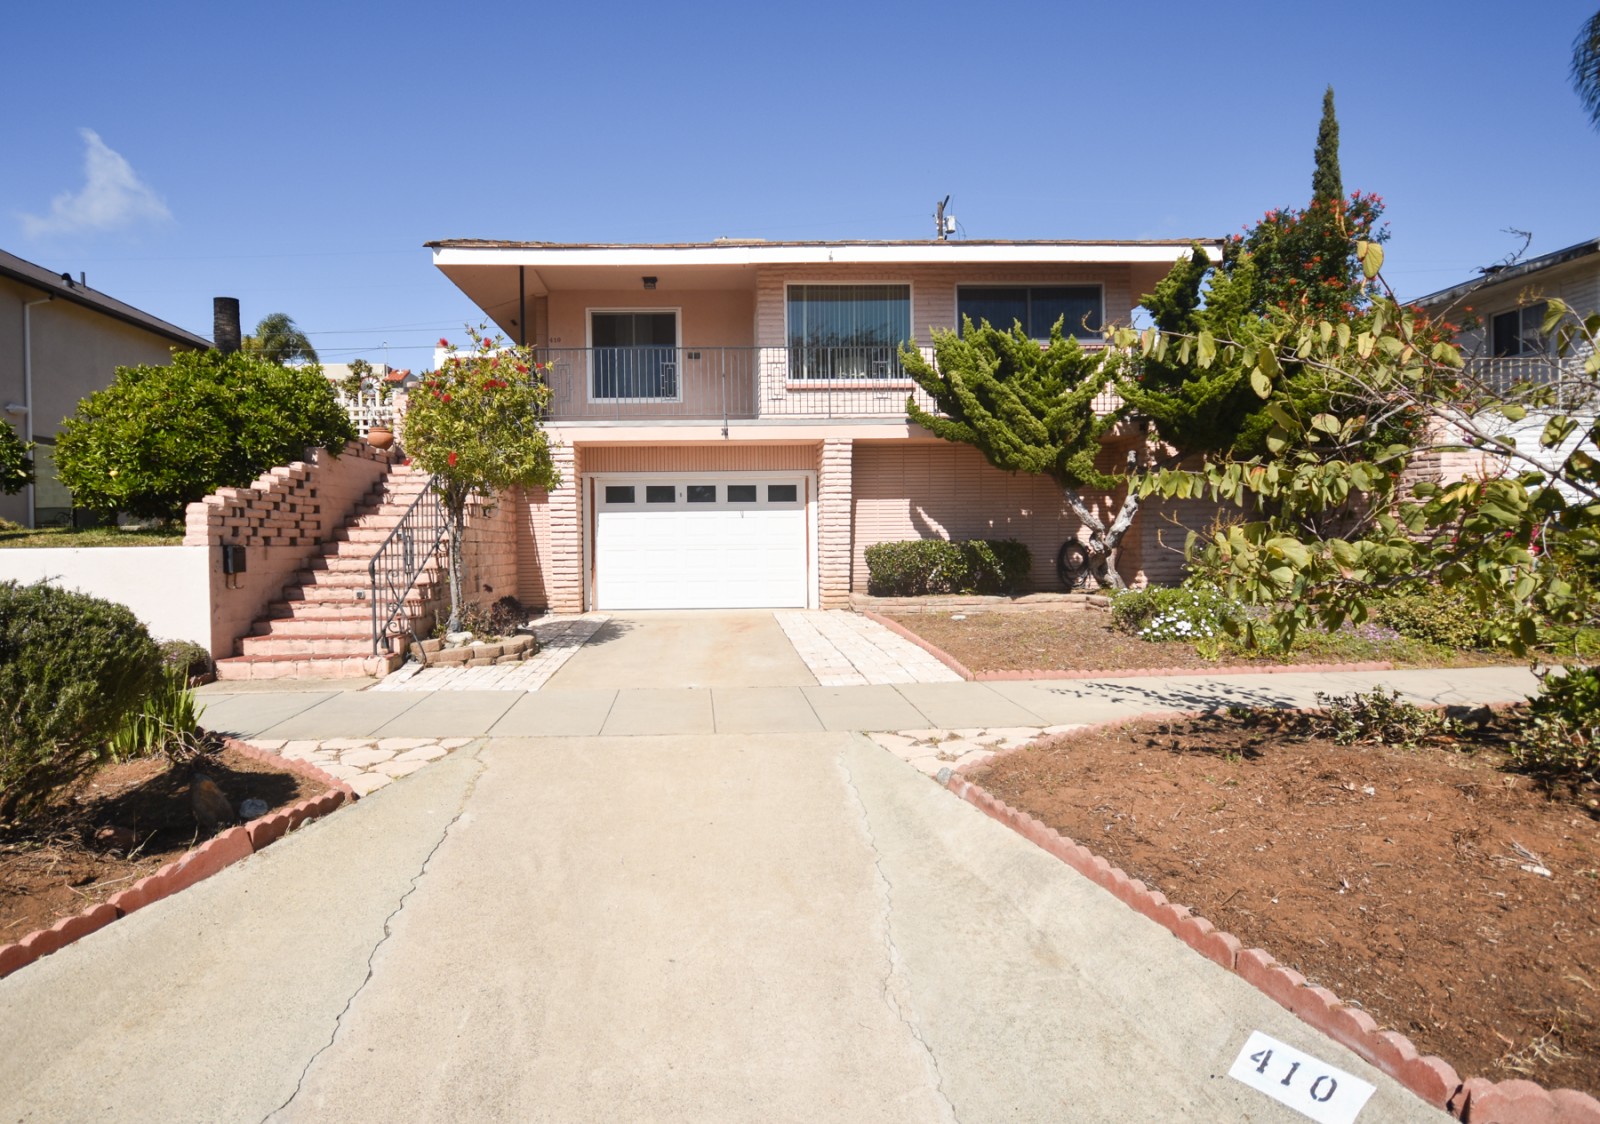 410 CLEMENTINE SOUTH, OCEANSIDE, CA 92054